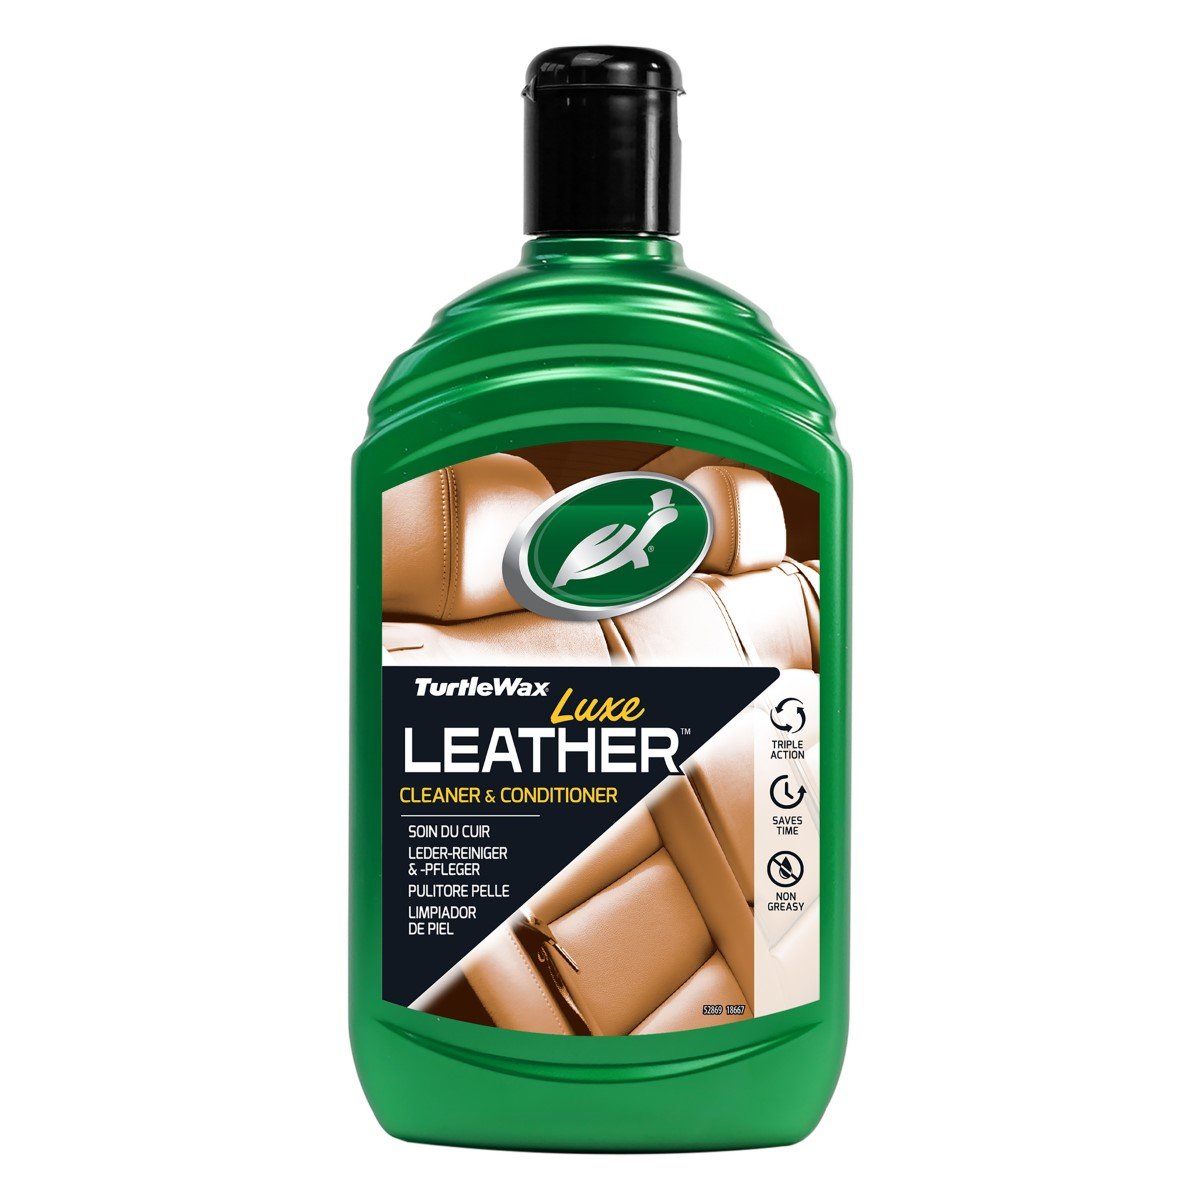 Luxe Leather Cleaner & Conditioner - 500ml